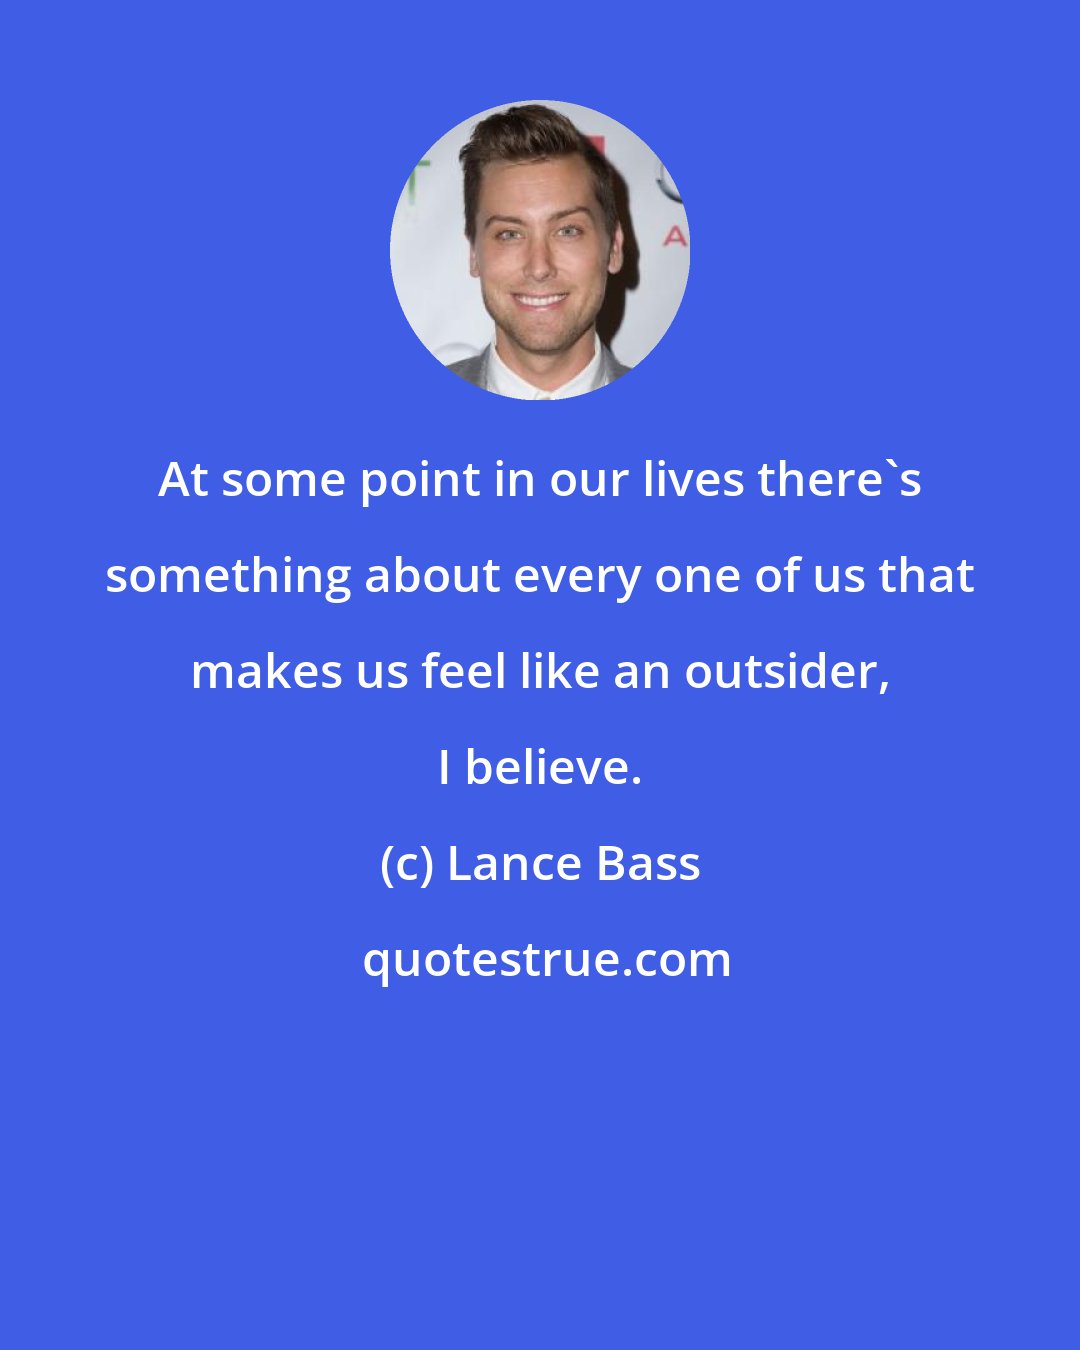 Lance Bass: At some point in our lives there's something about every one of us that makes us feel like an outsider, I believe.